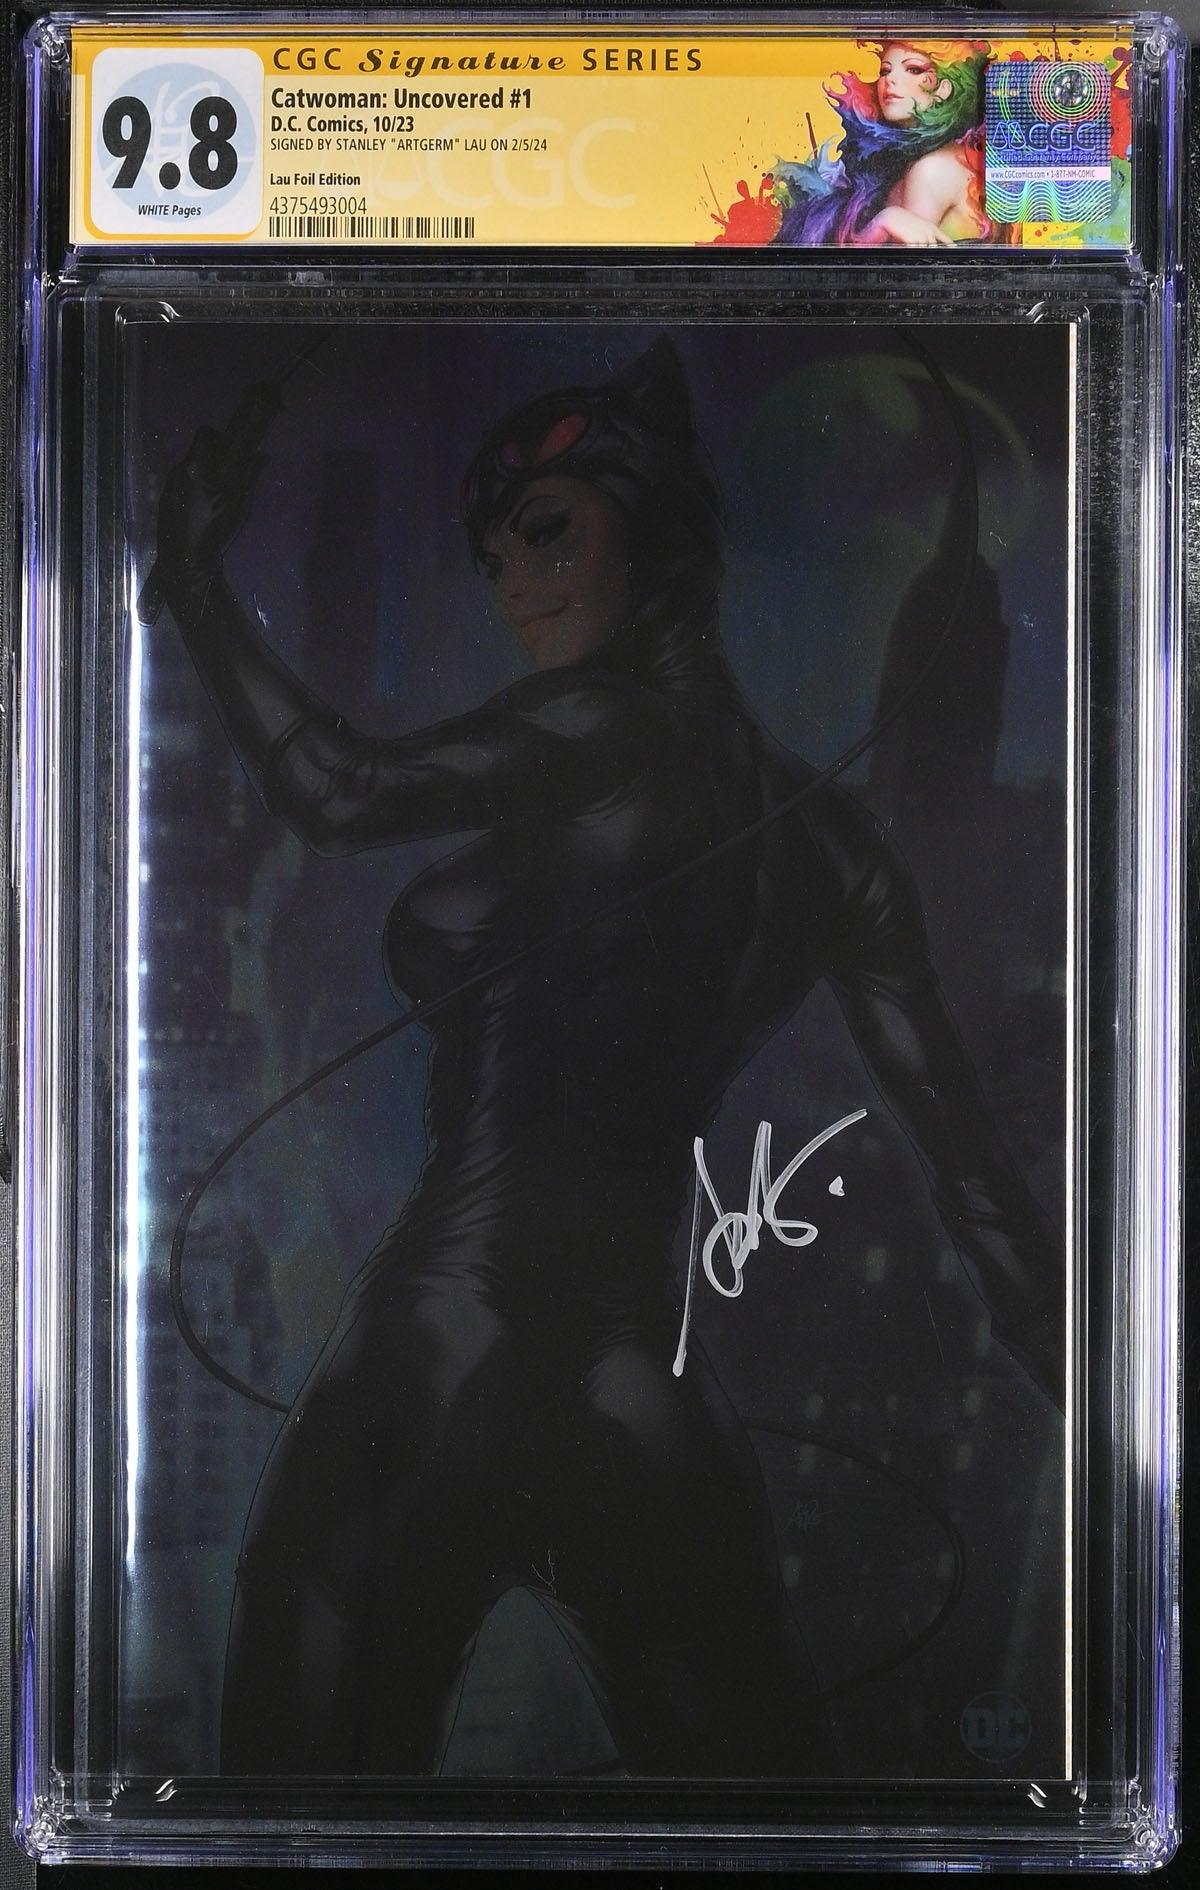 CGC CATWOMAN UNCOVERED #1 LAU FOIL EDITION (9.8) SIGNATURE SERIES - SIGNED BY STANLEY "ARTGERM"